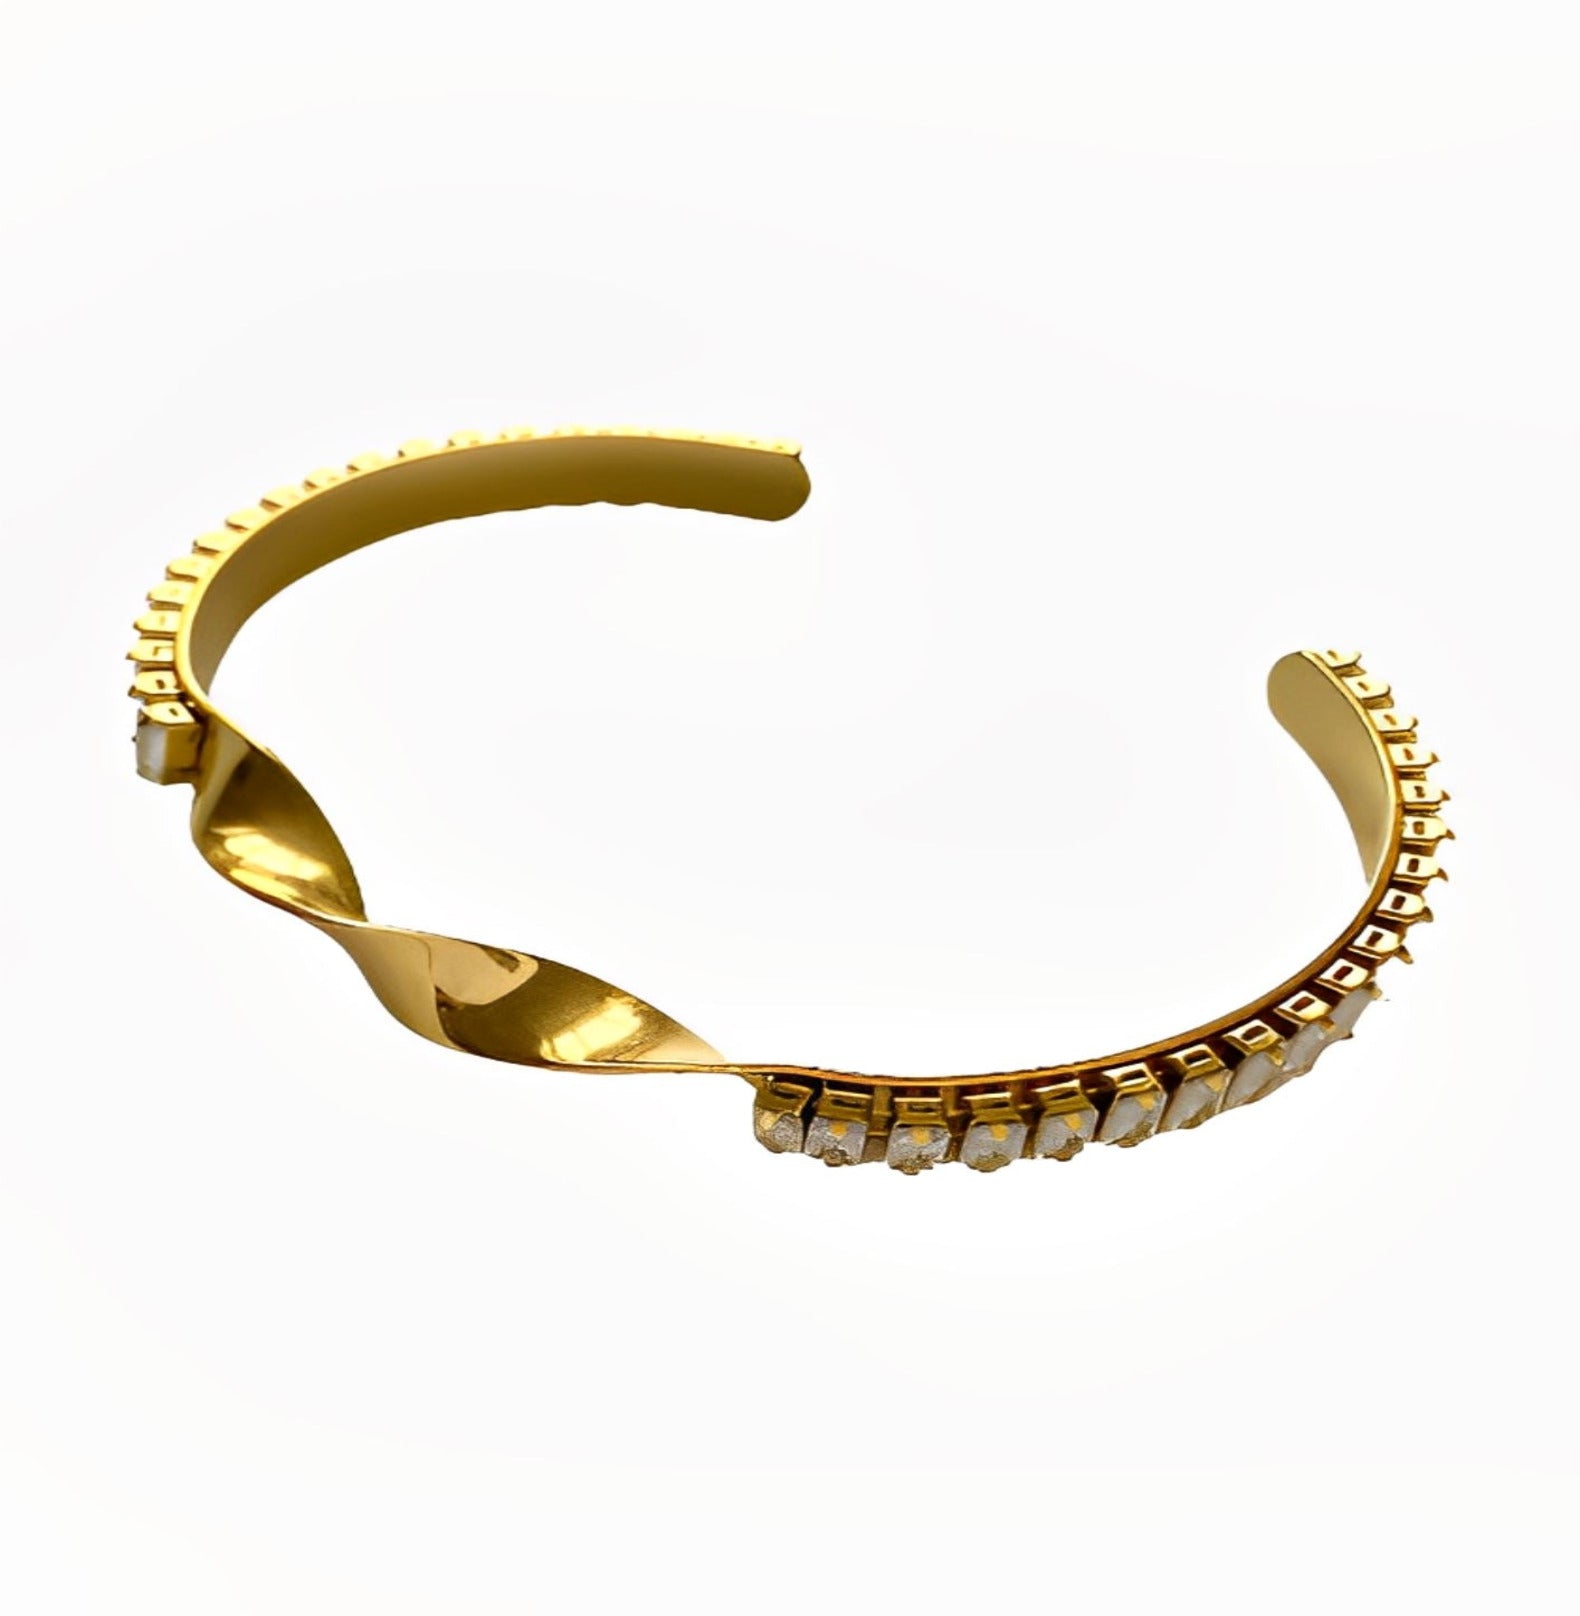 ZIRCON BRACELET braclet Yubama Jewelry Online Store - The Elegant Designs of Gold and Silver ! 